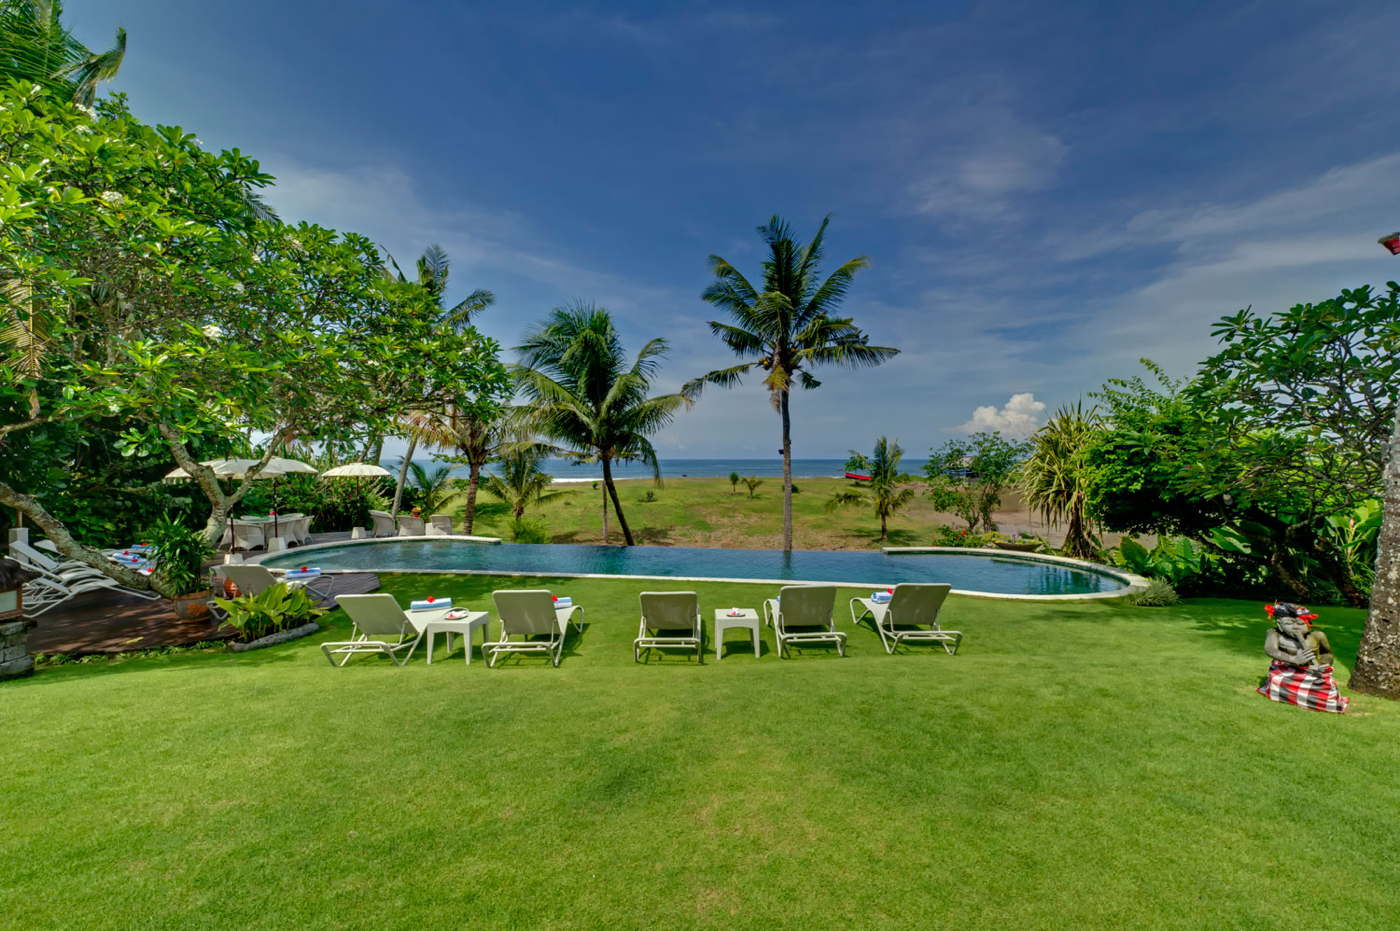 Luxury villa for ren tat the beach in Bali with pool and staff